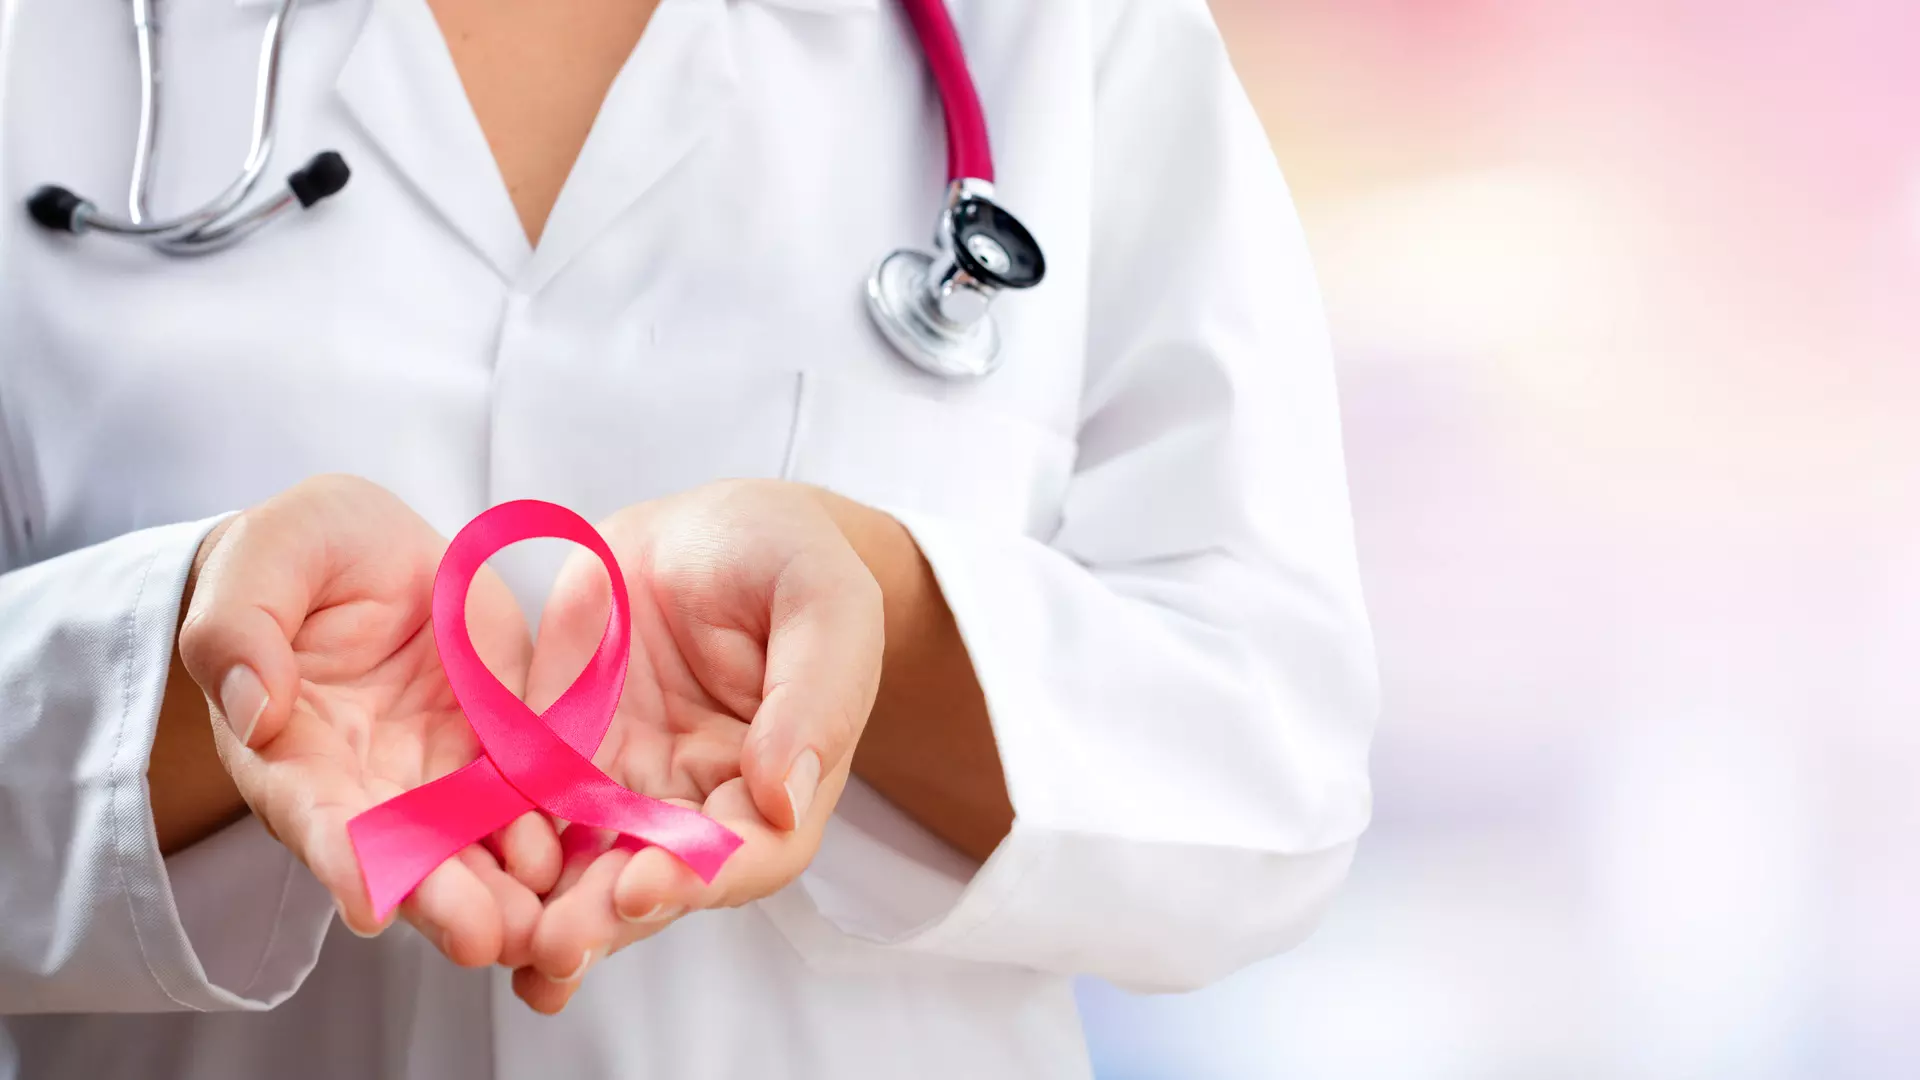 How can you decrease breast cancer risk? Here are some answers